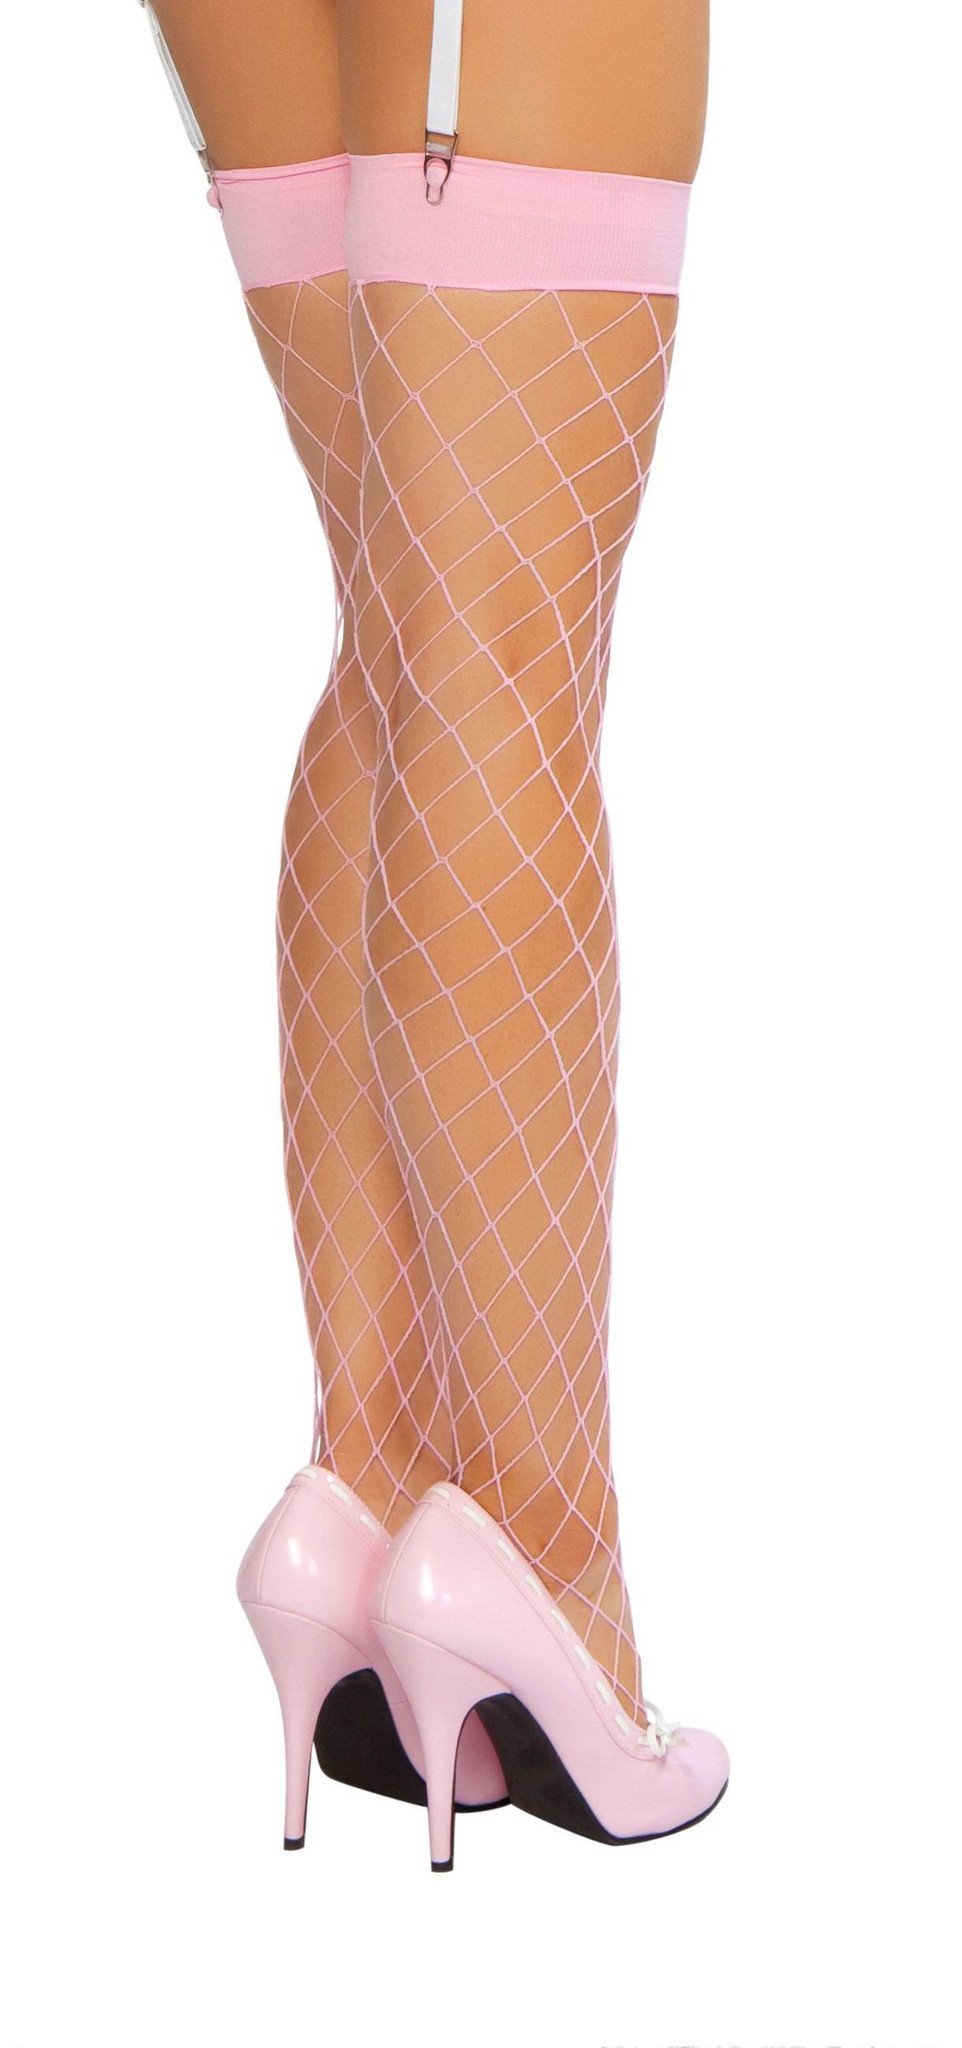 Buy Thigh High Fishnet Stockings from RomaRetailShop for 3.99 with Same Day Shipping Designed by Roma Costume STC207-BP-O/S